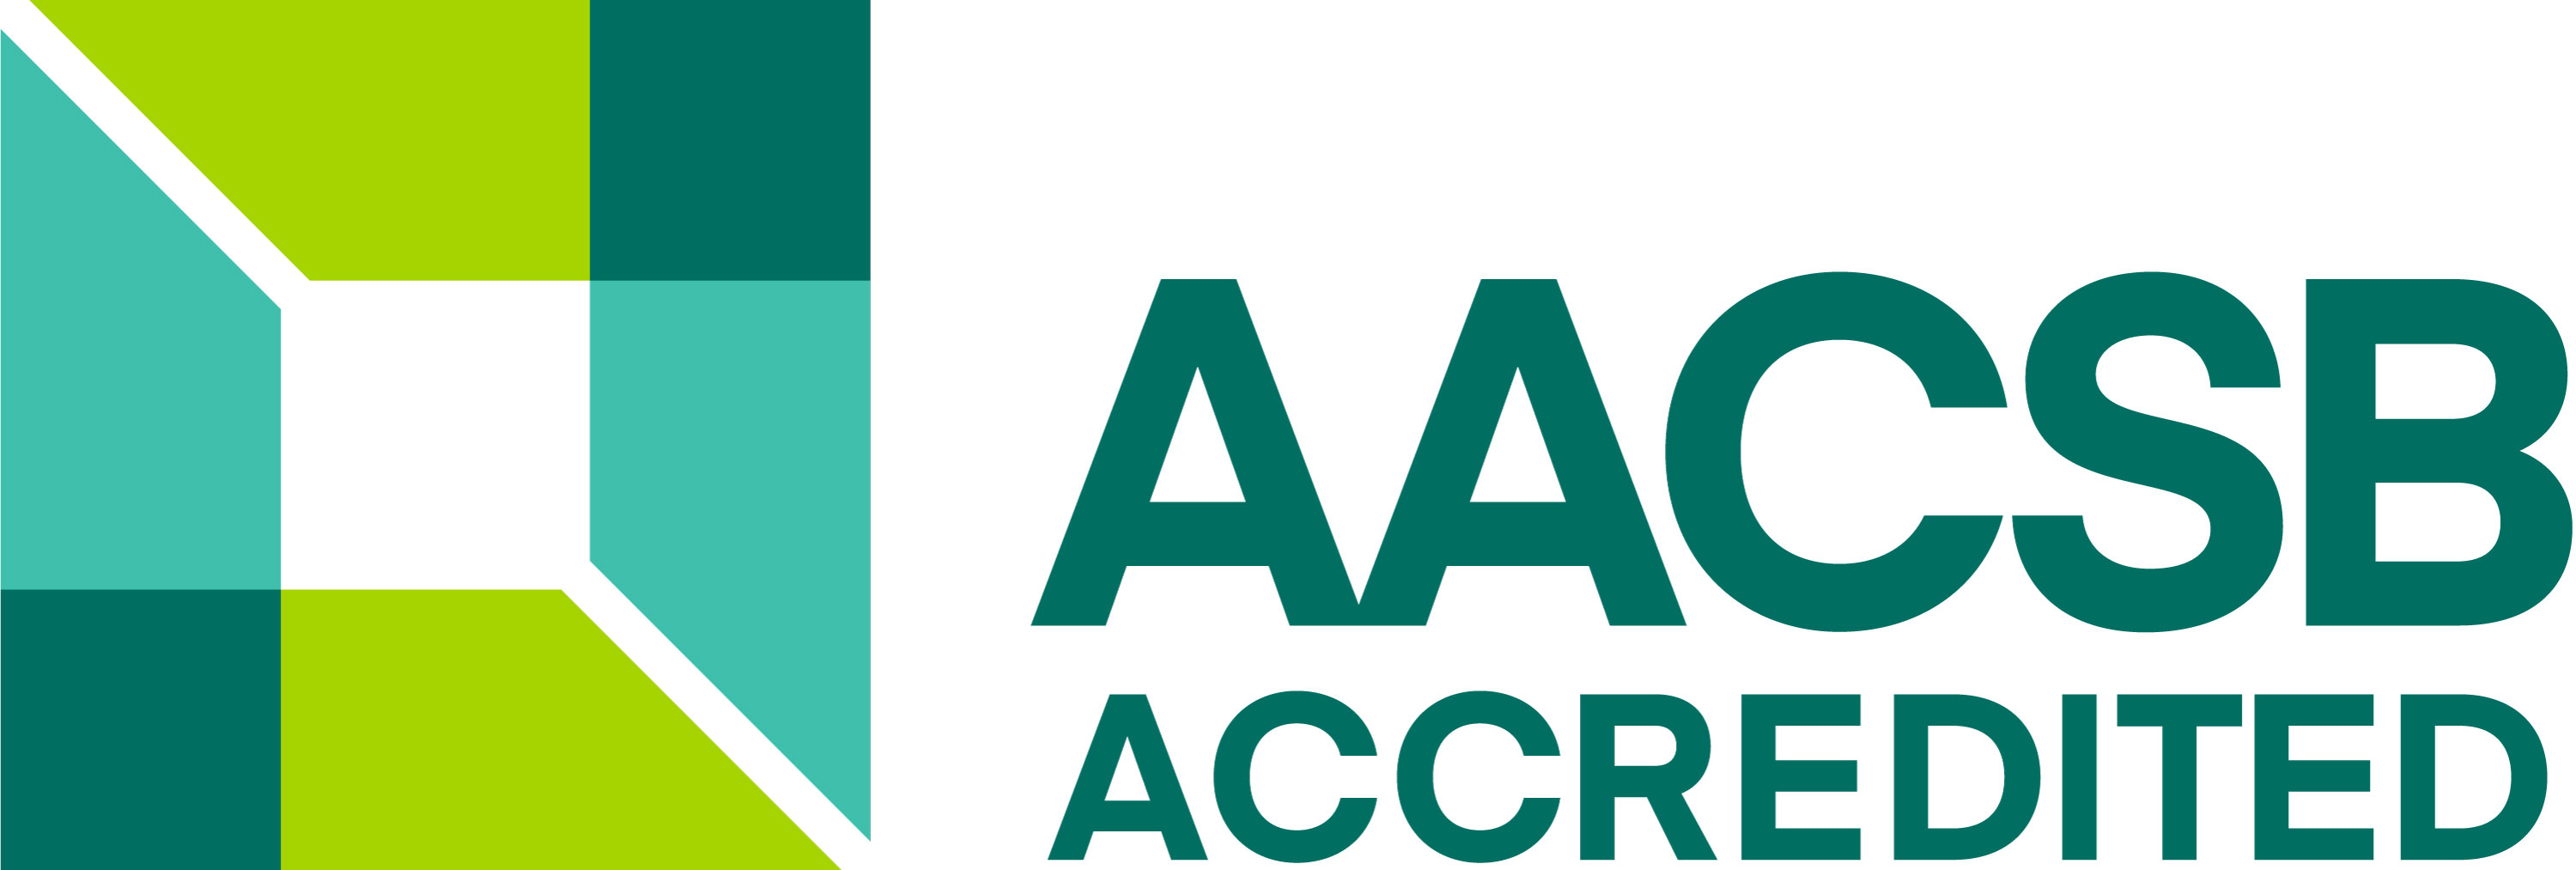 AACSB logo updated